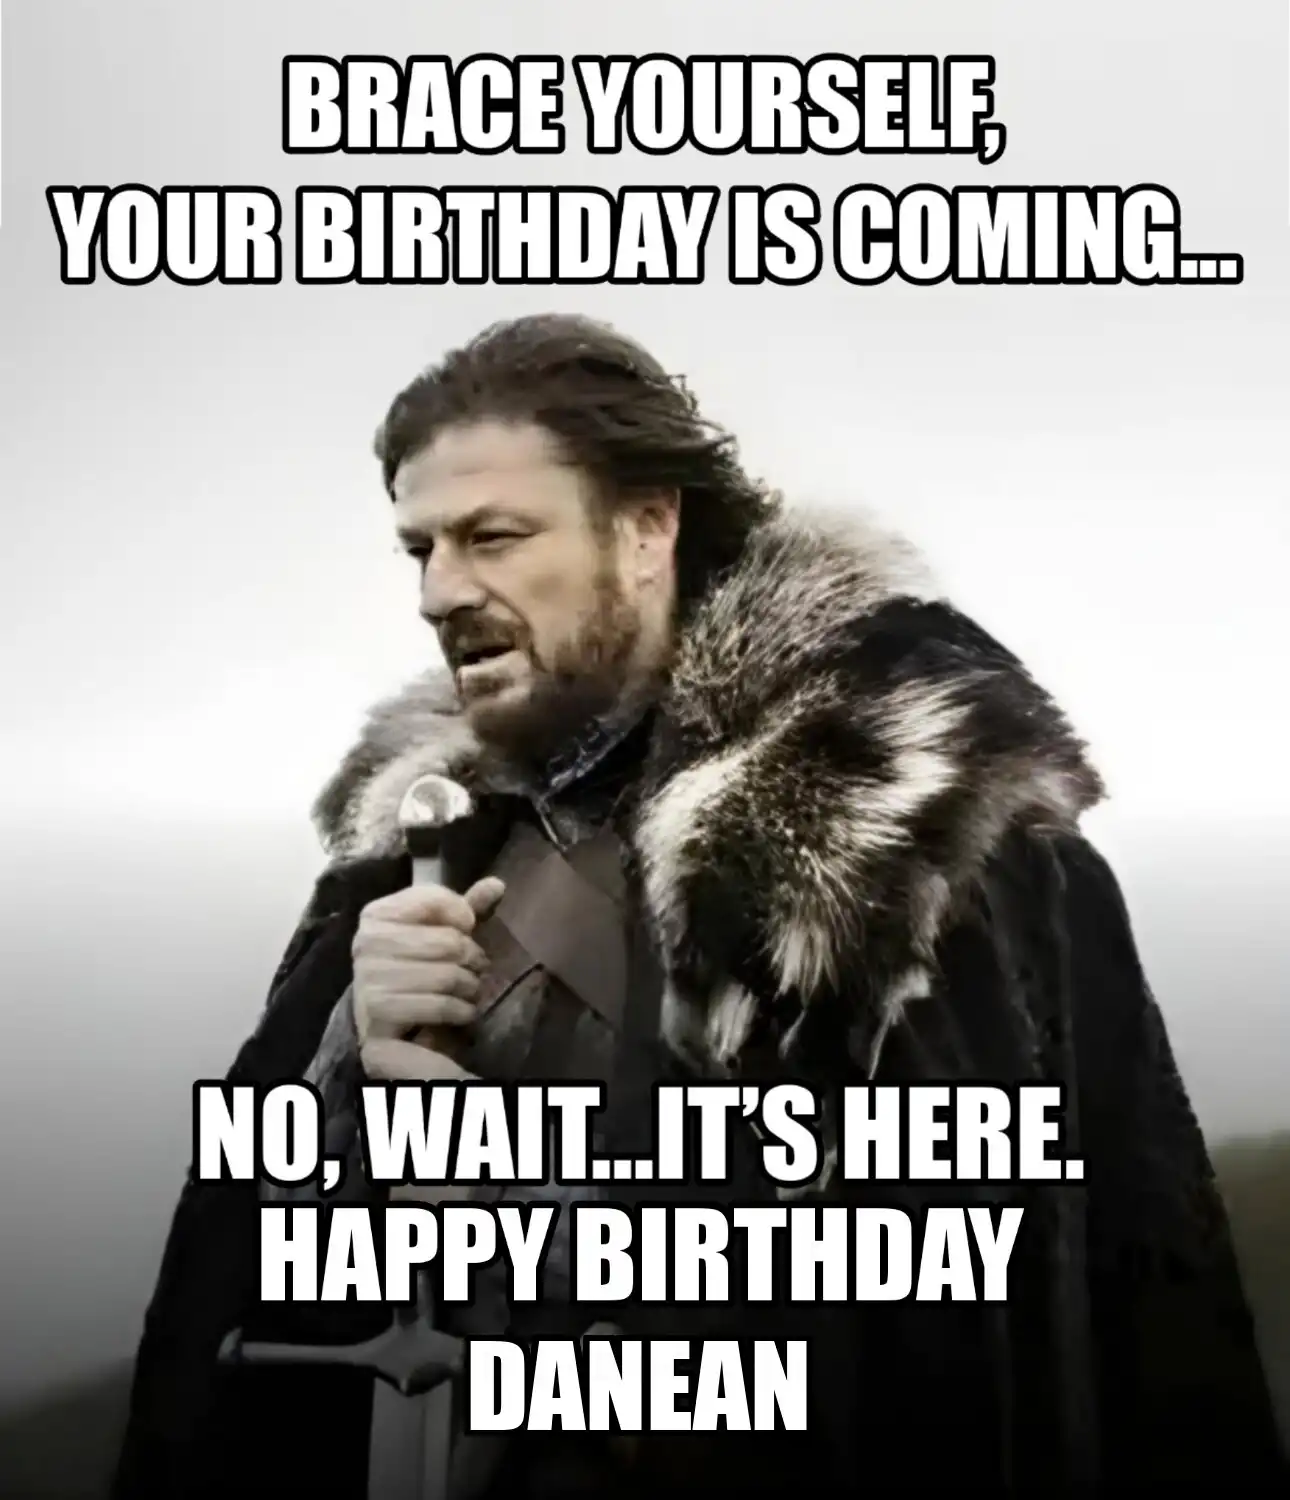 Happy Birthday Danean Brace Yourself Your Birthday Is Coming Meme